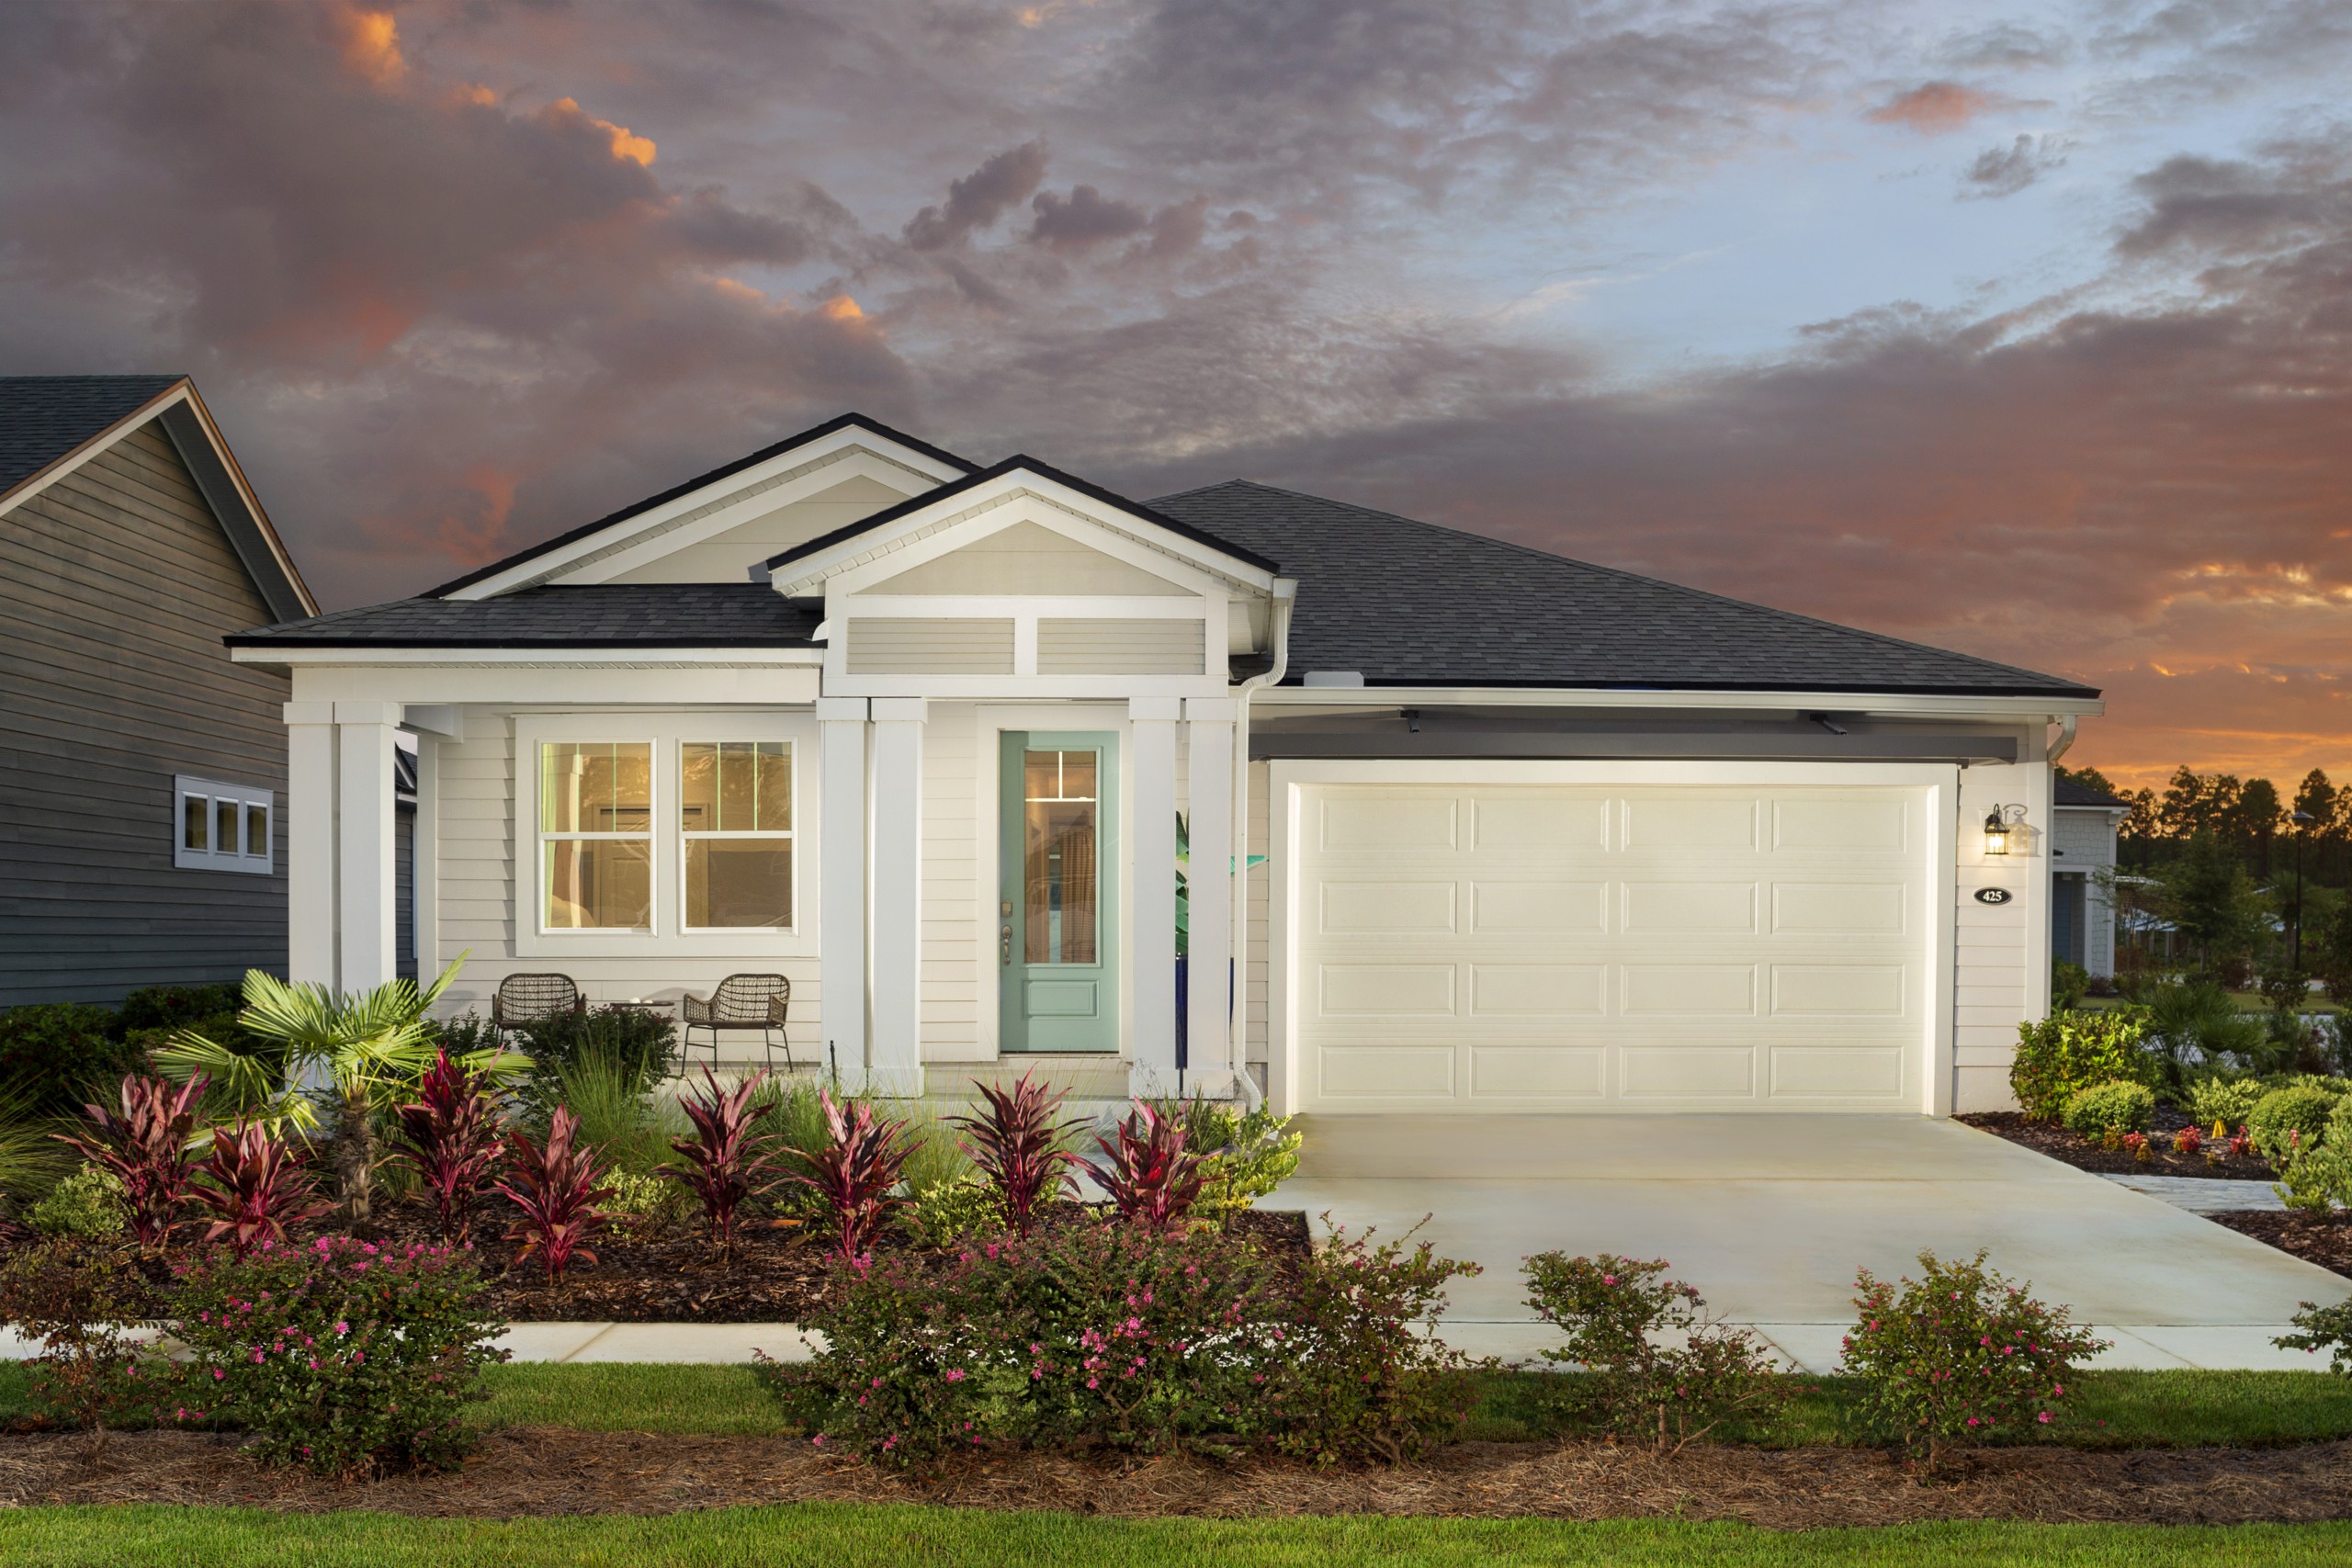 Mattamy Homes Wildlight single-story home at night with cream exterior, white trim and teal front door.